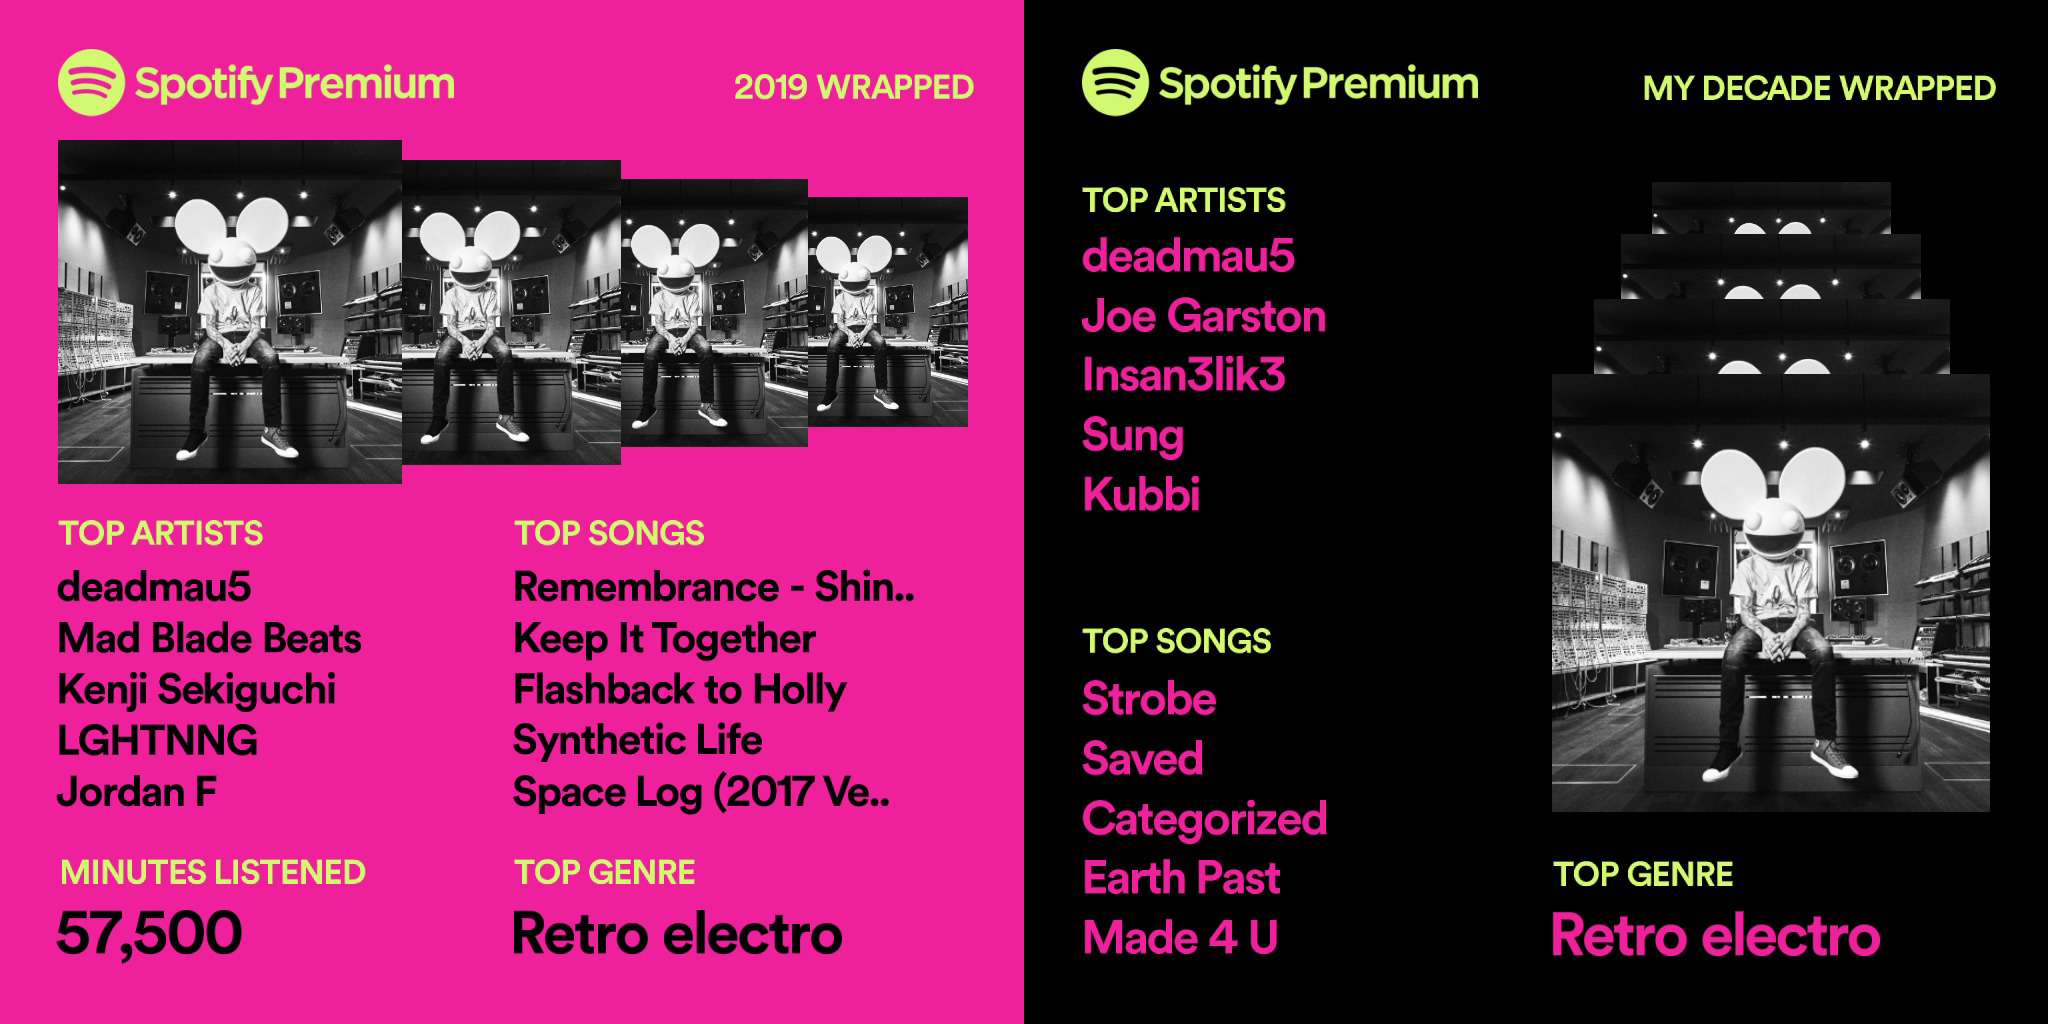 My 2019 Wrapped and My Decade Wrapped on Spotify